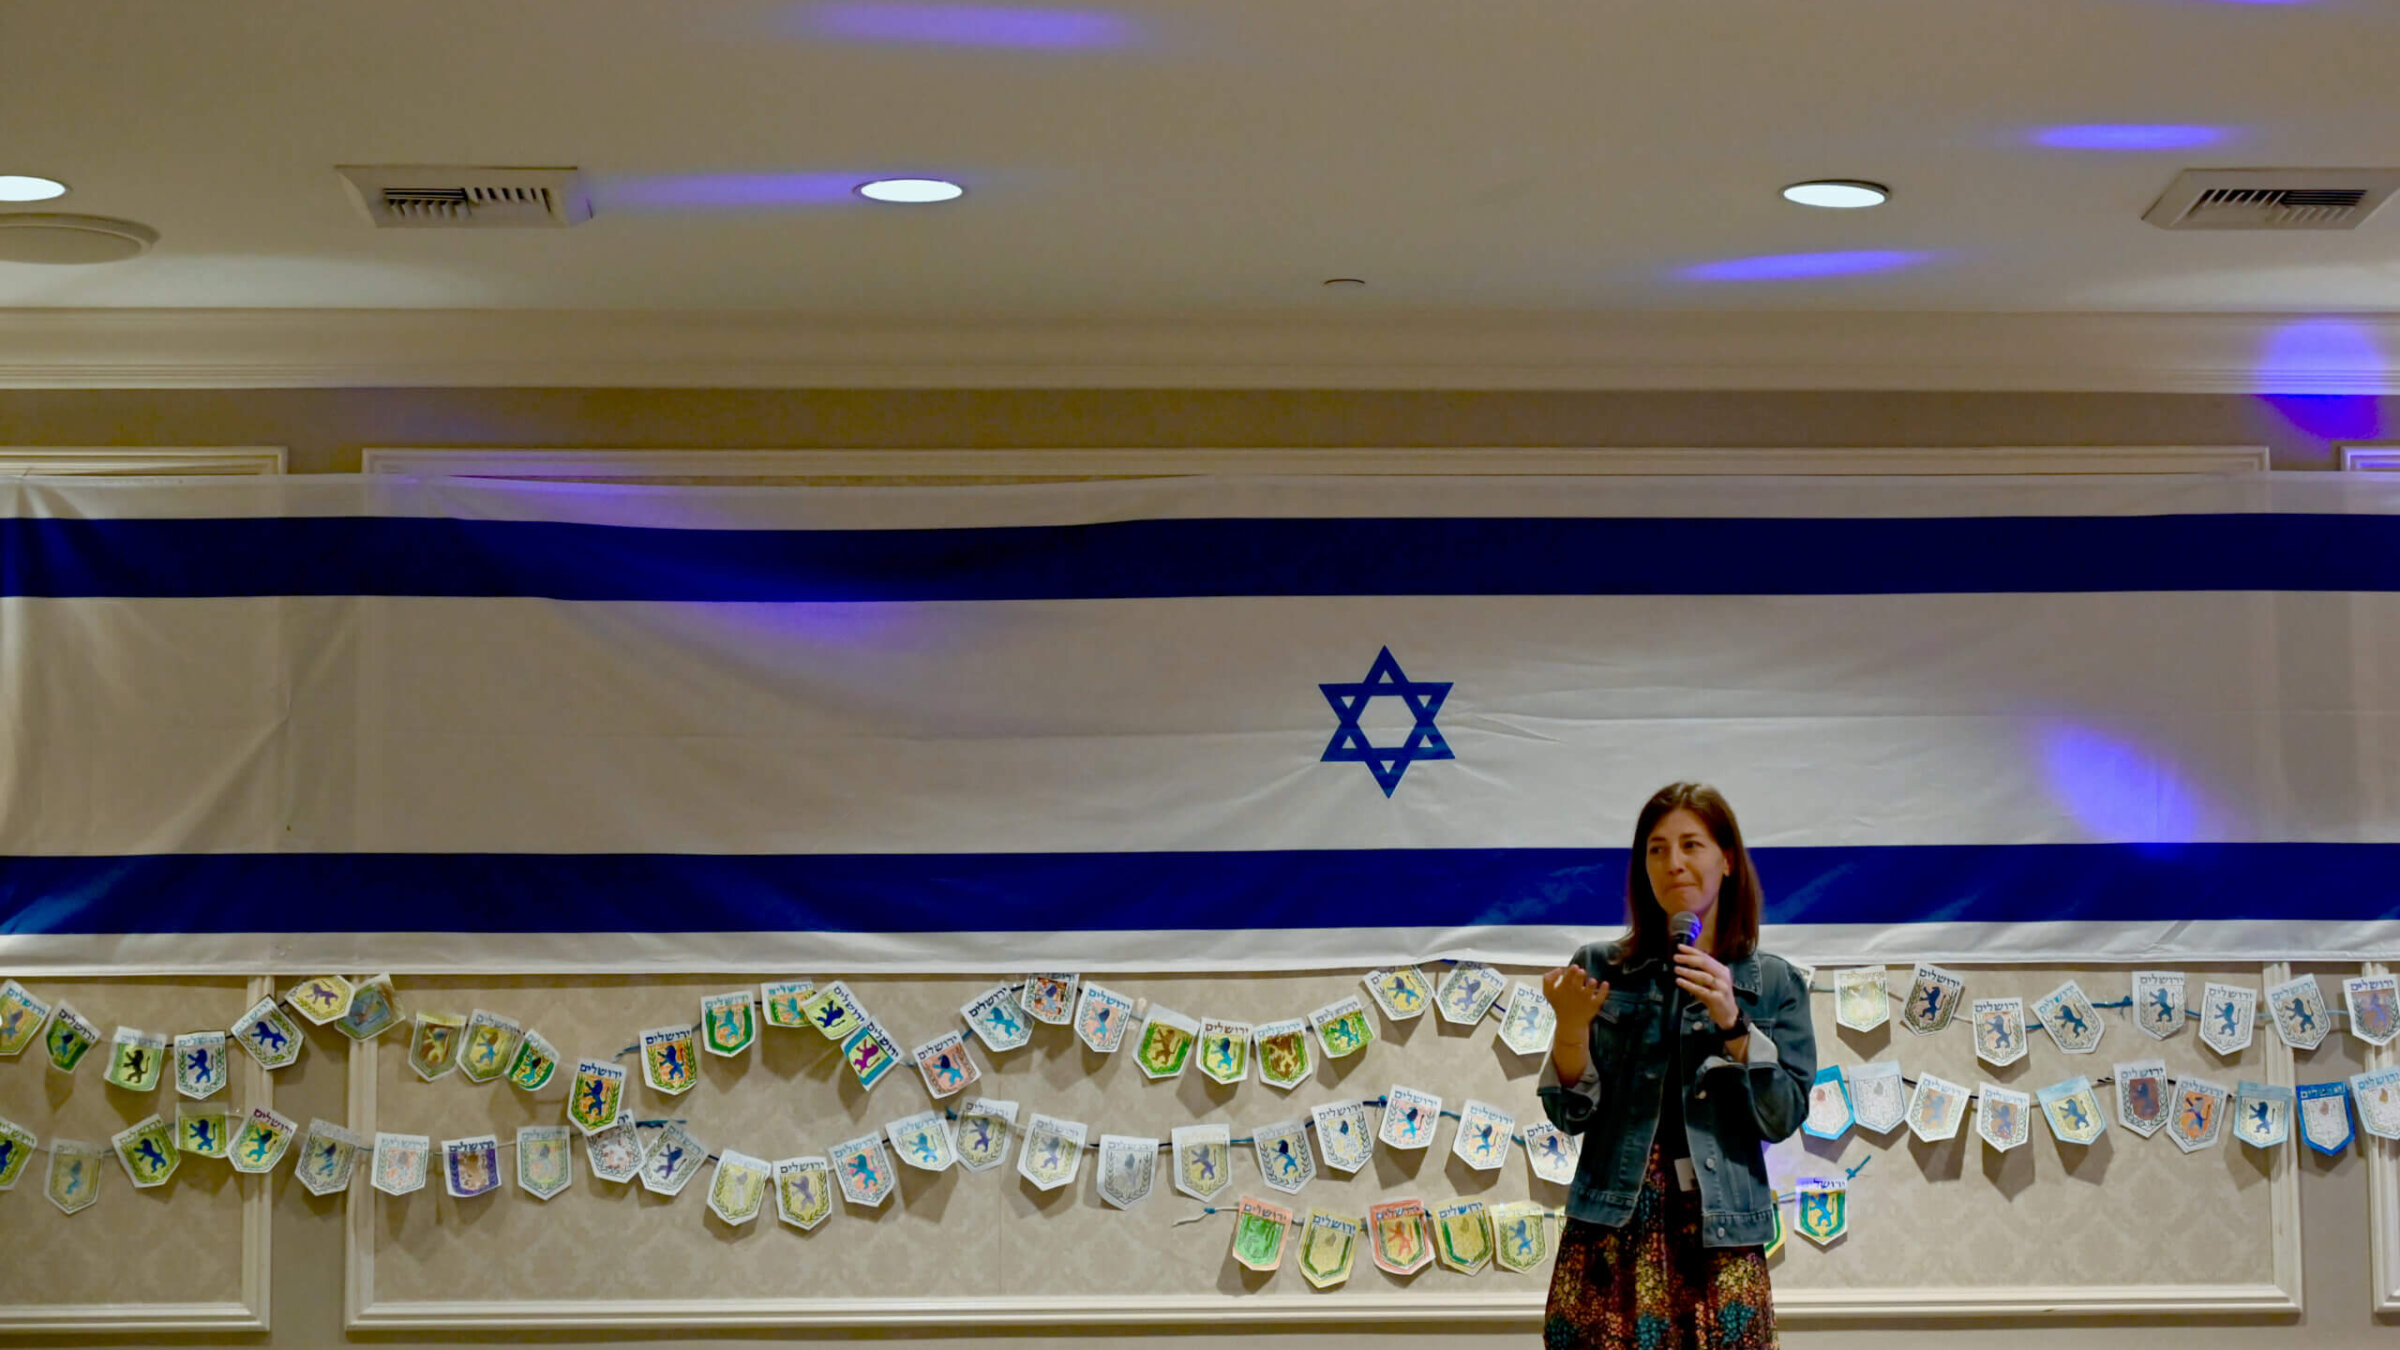 While the war has indefinitely postponed Rothblum’s class trip to Israel, she said it has been easy to incorporate discussions of it into her curriculum.